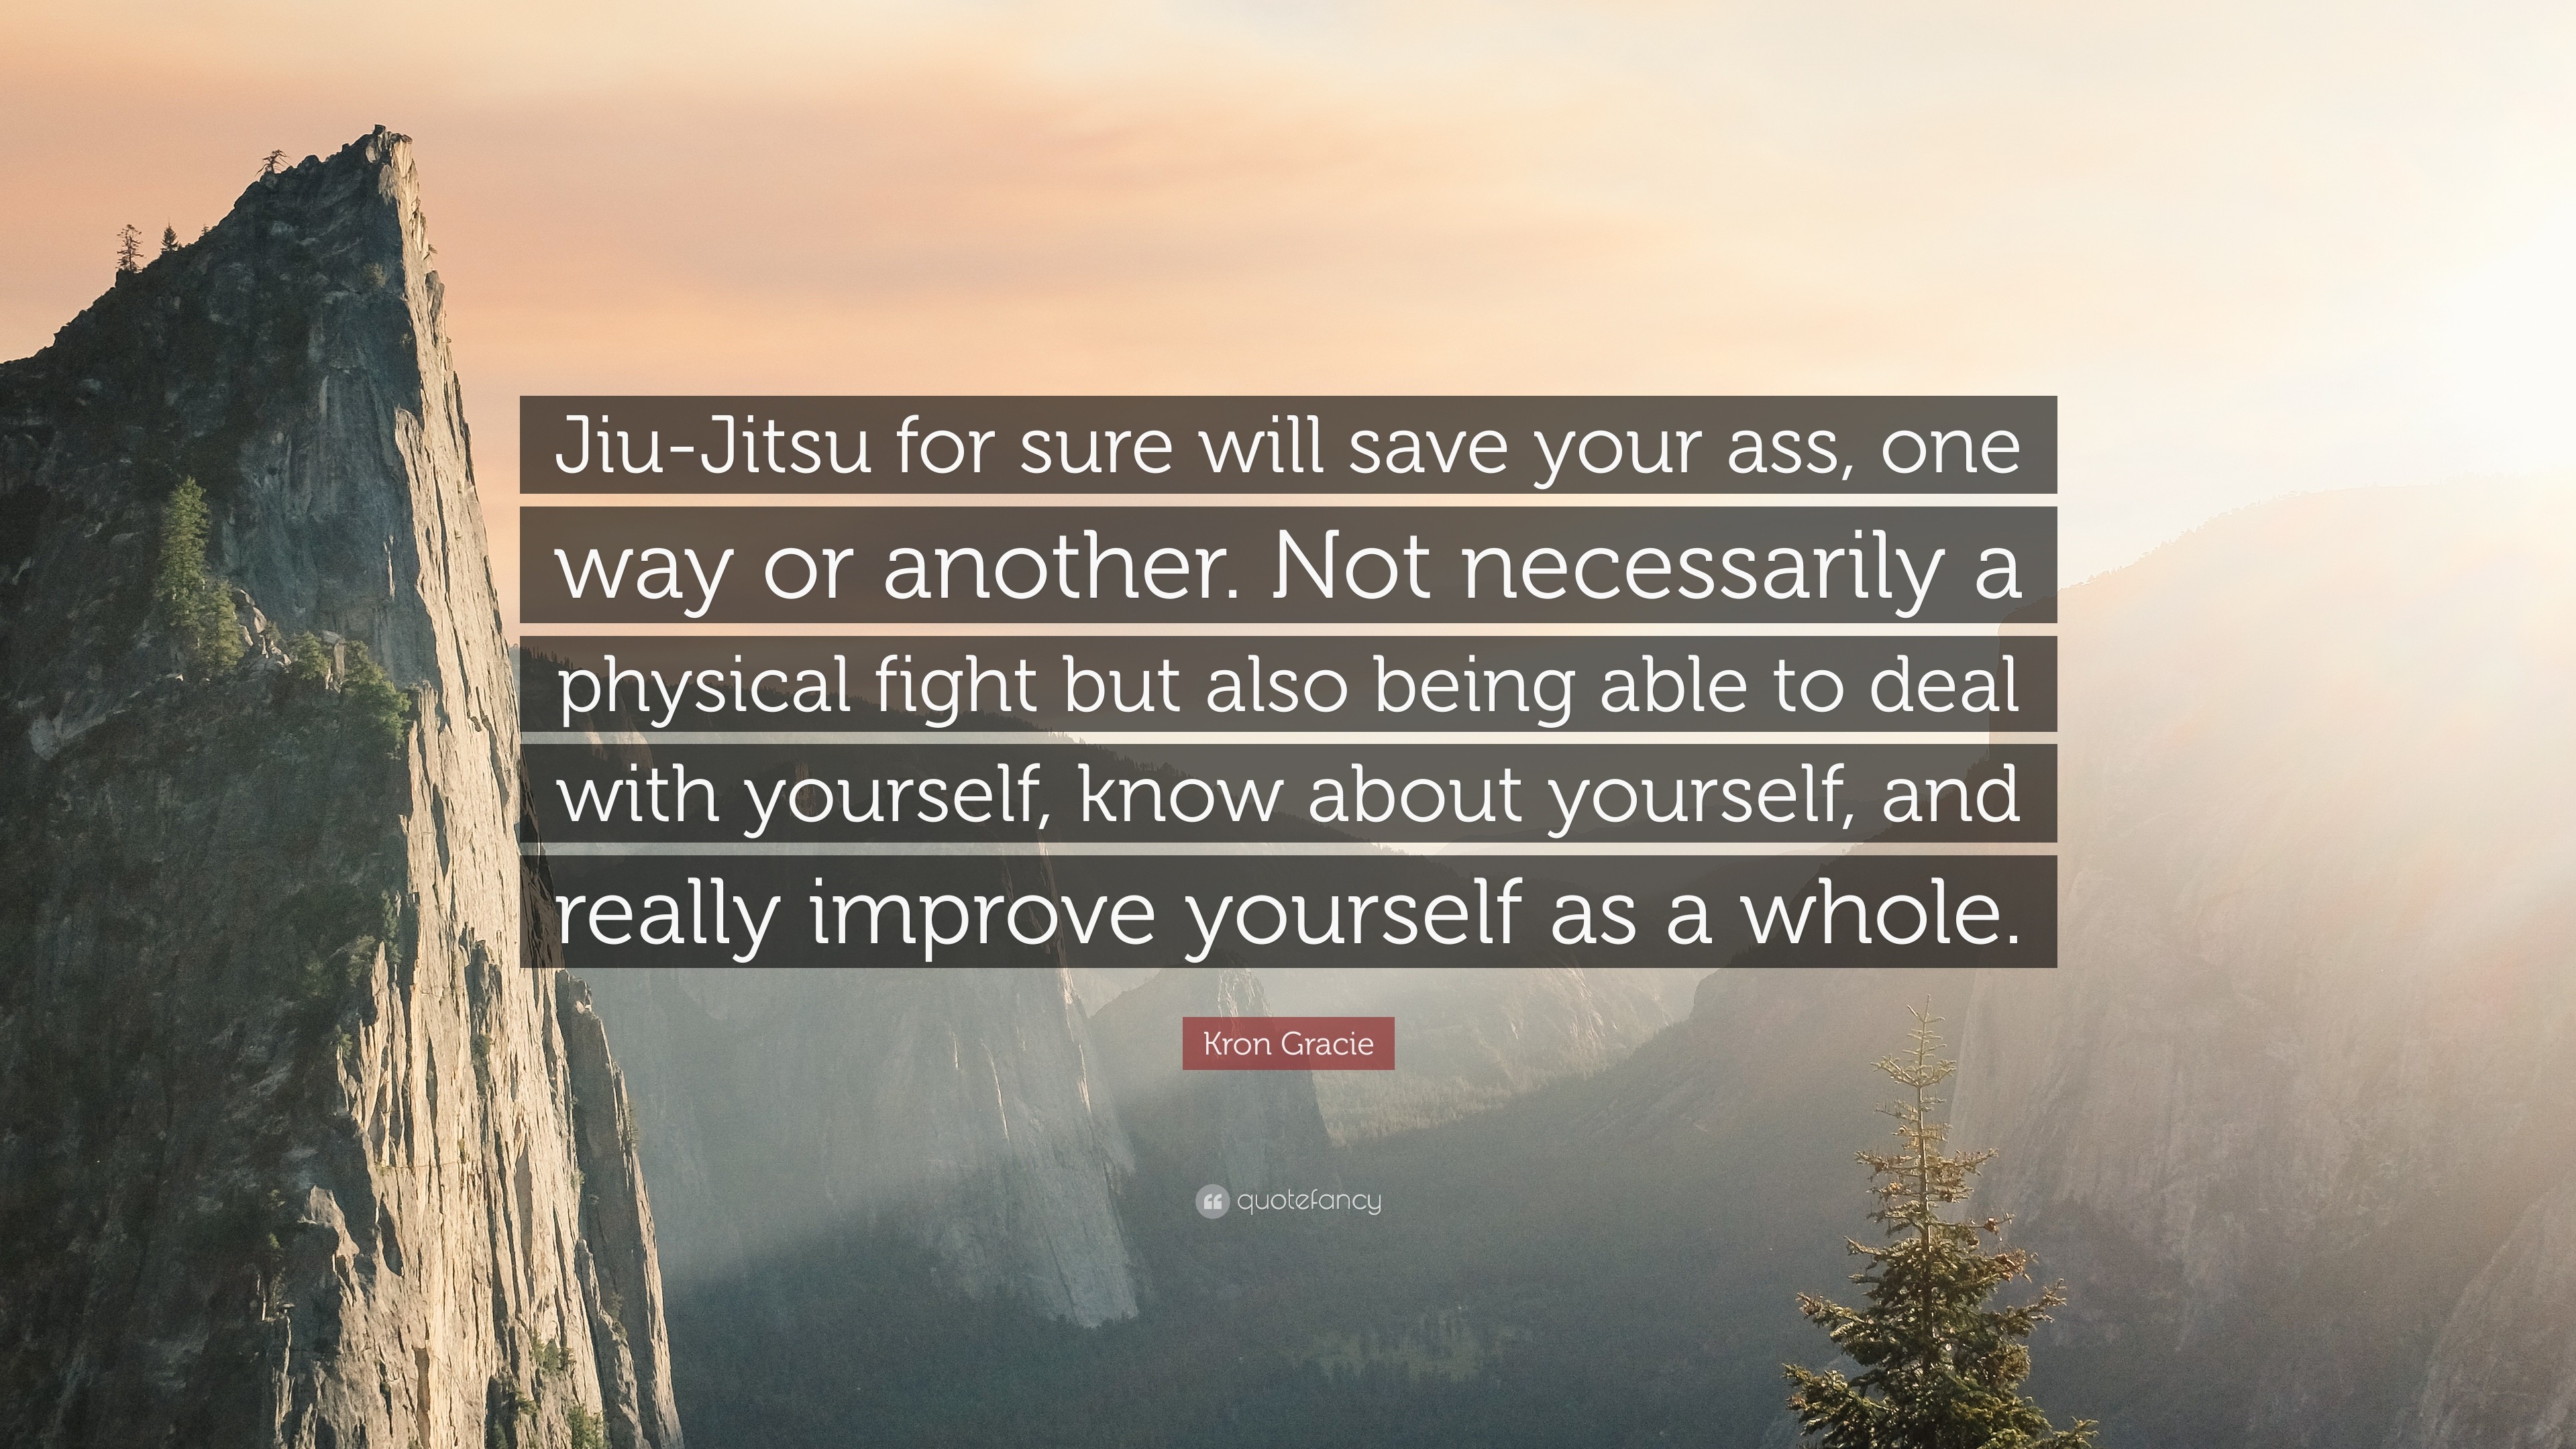 3840x2160 Kron Gracie Quote: “Jiu-Jitsu for sure will save your ass, one